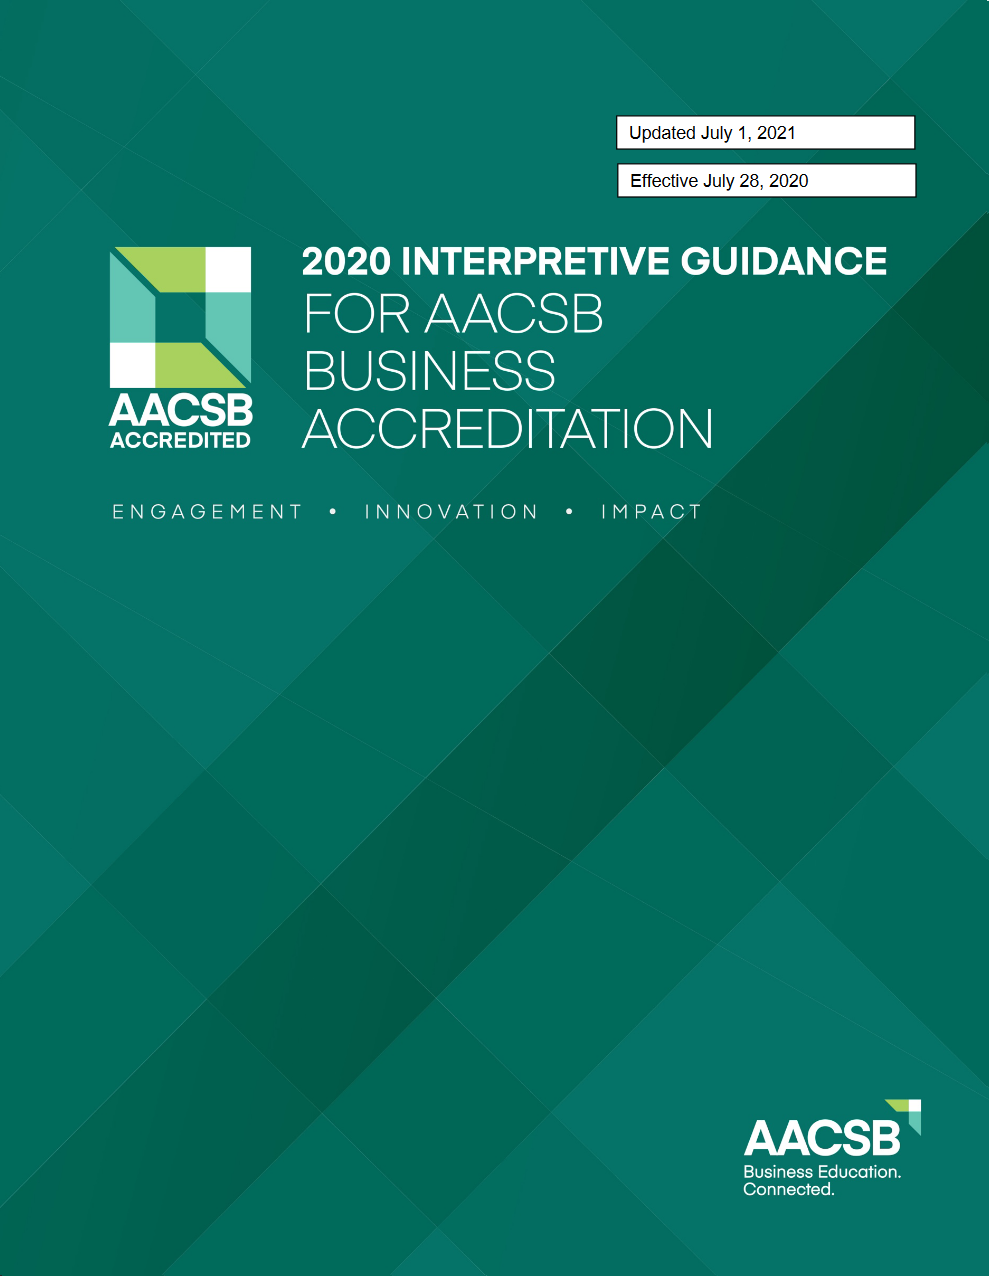 Cover page for the 2020 Interpretive Guidance for AACSB Business Accreditation